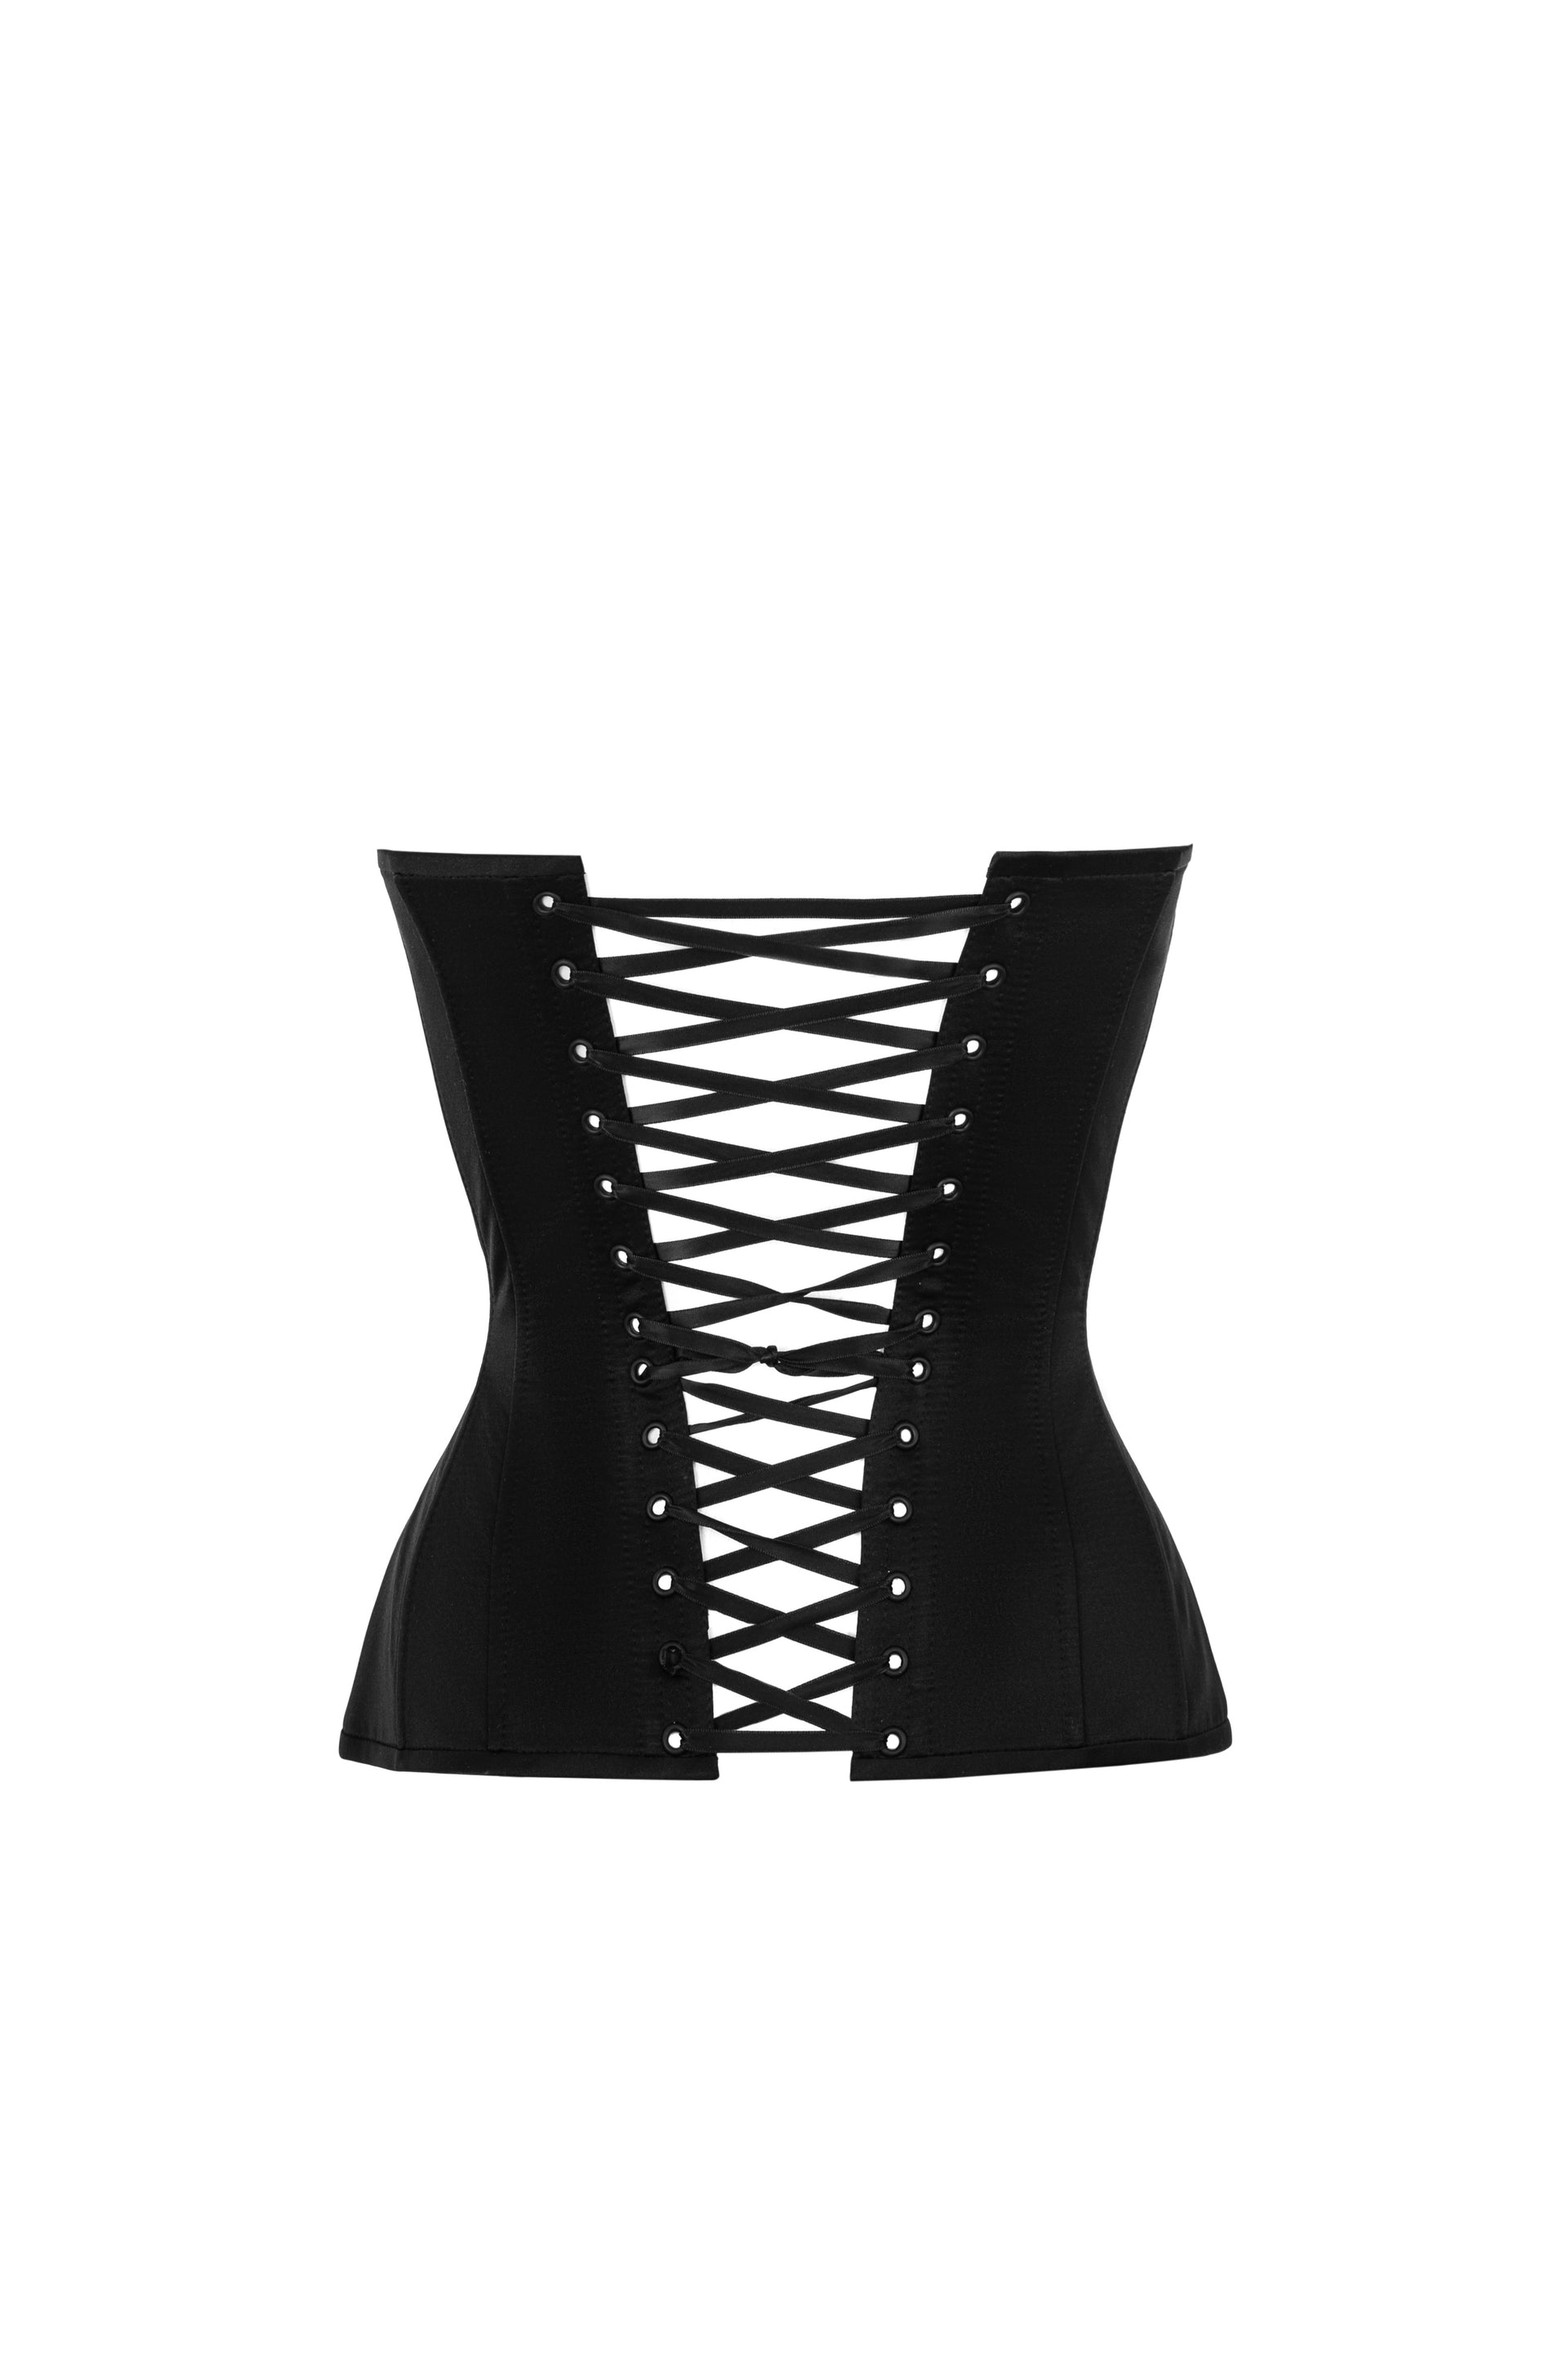 Lace black corset with cups - STATNAIA